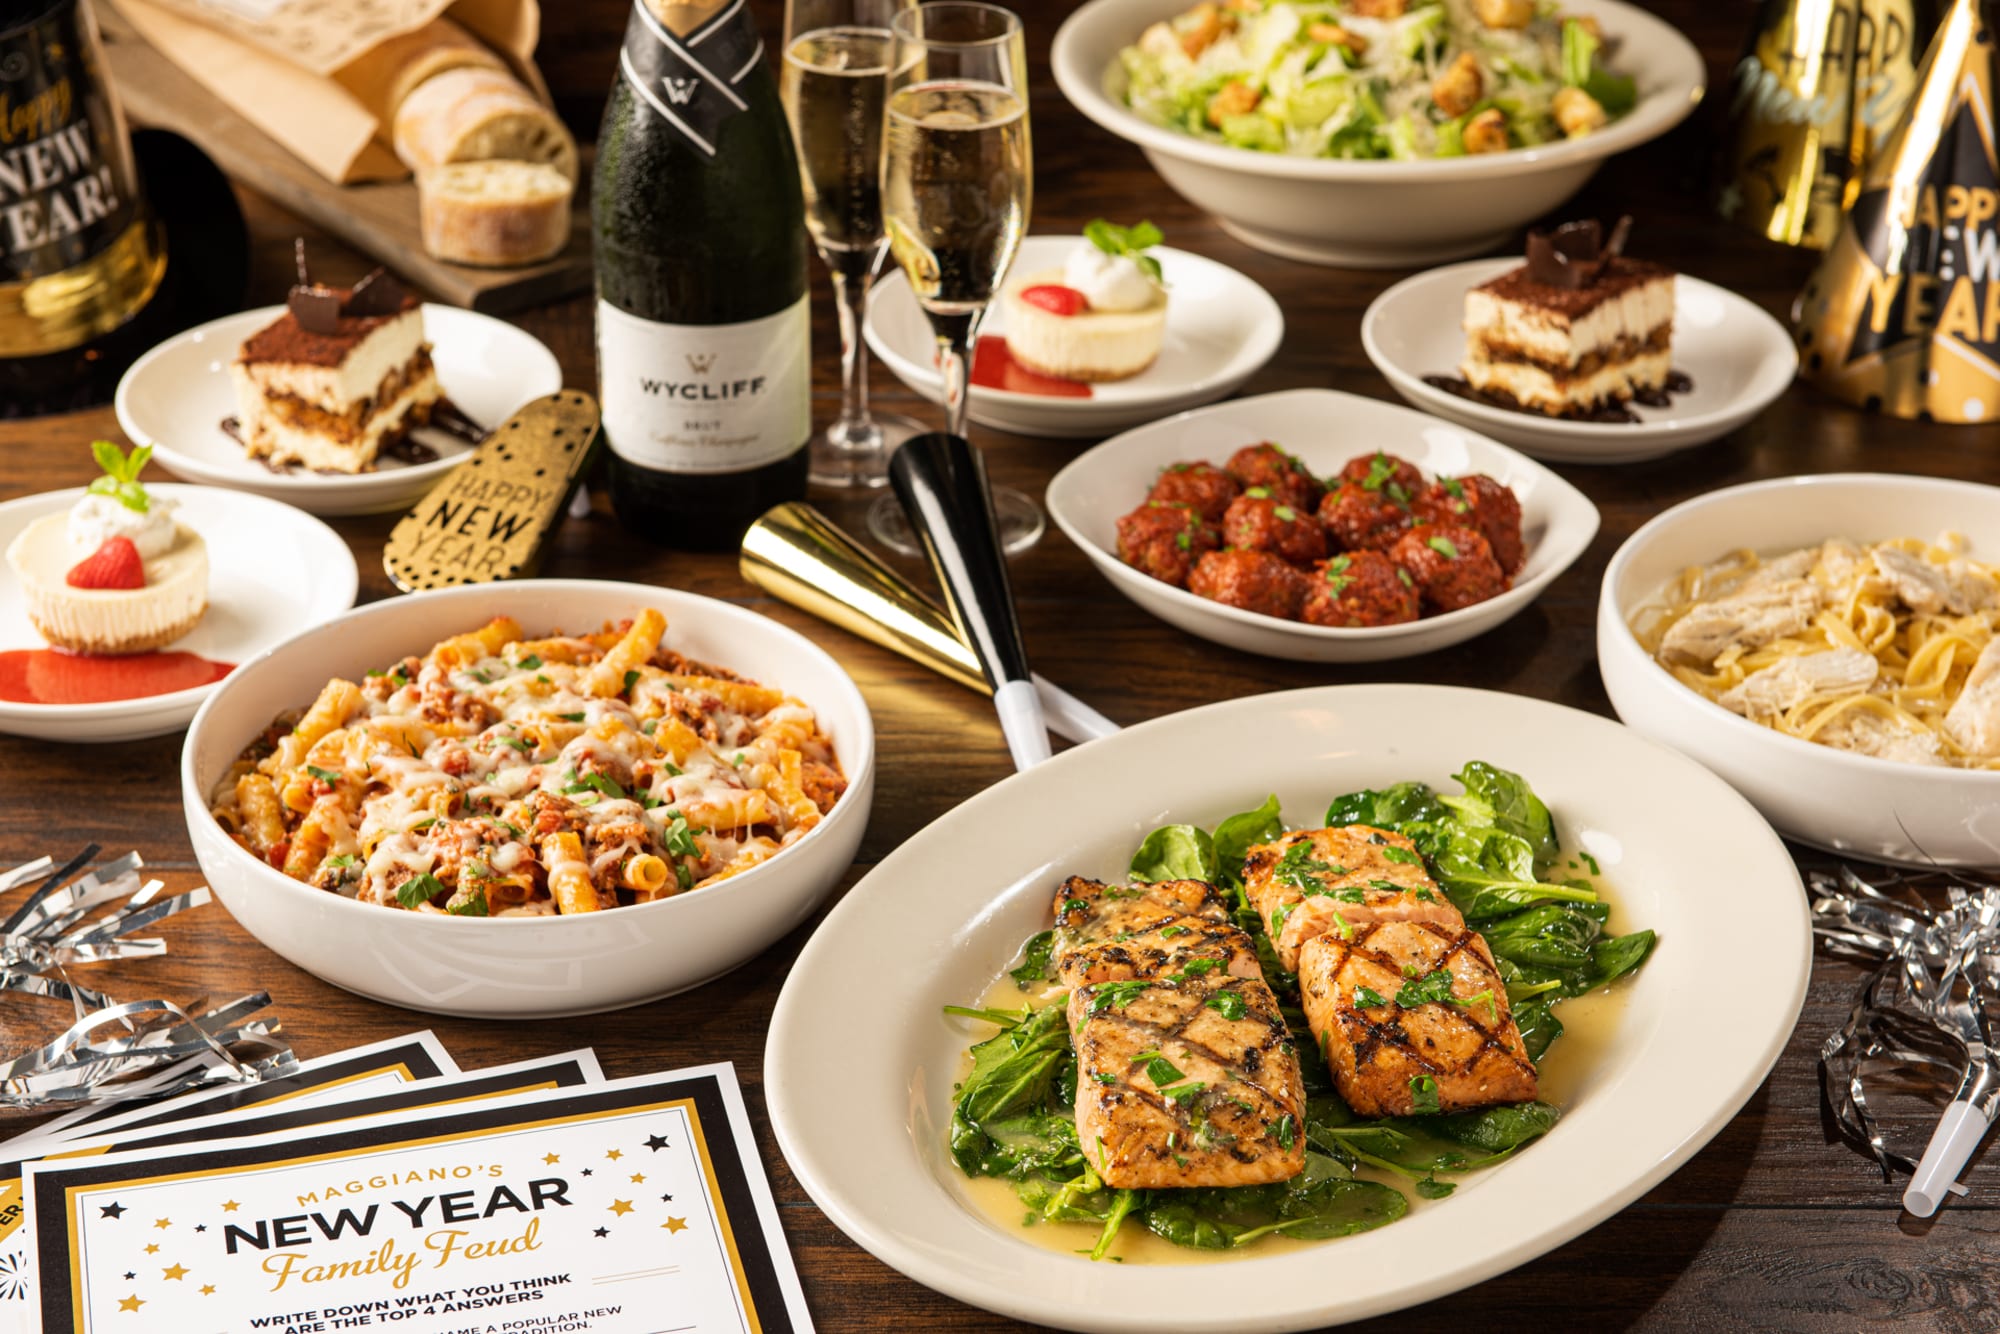 Maggiano’s Little Italy New Year Carryout Bundle is the ultimate